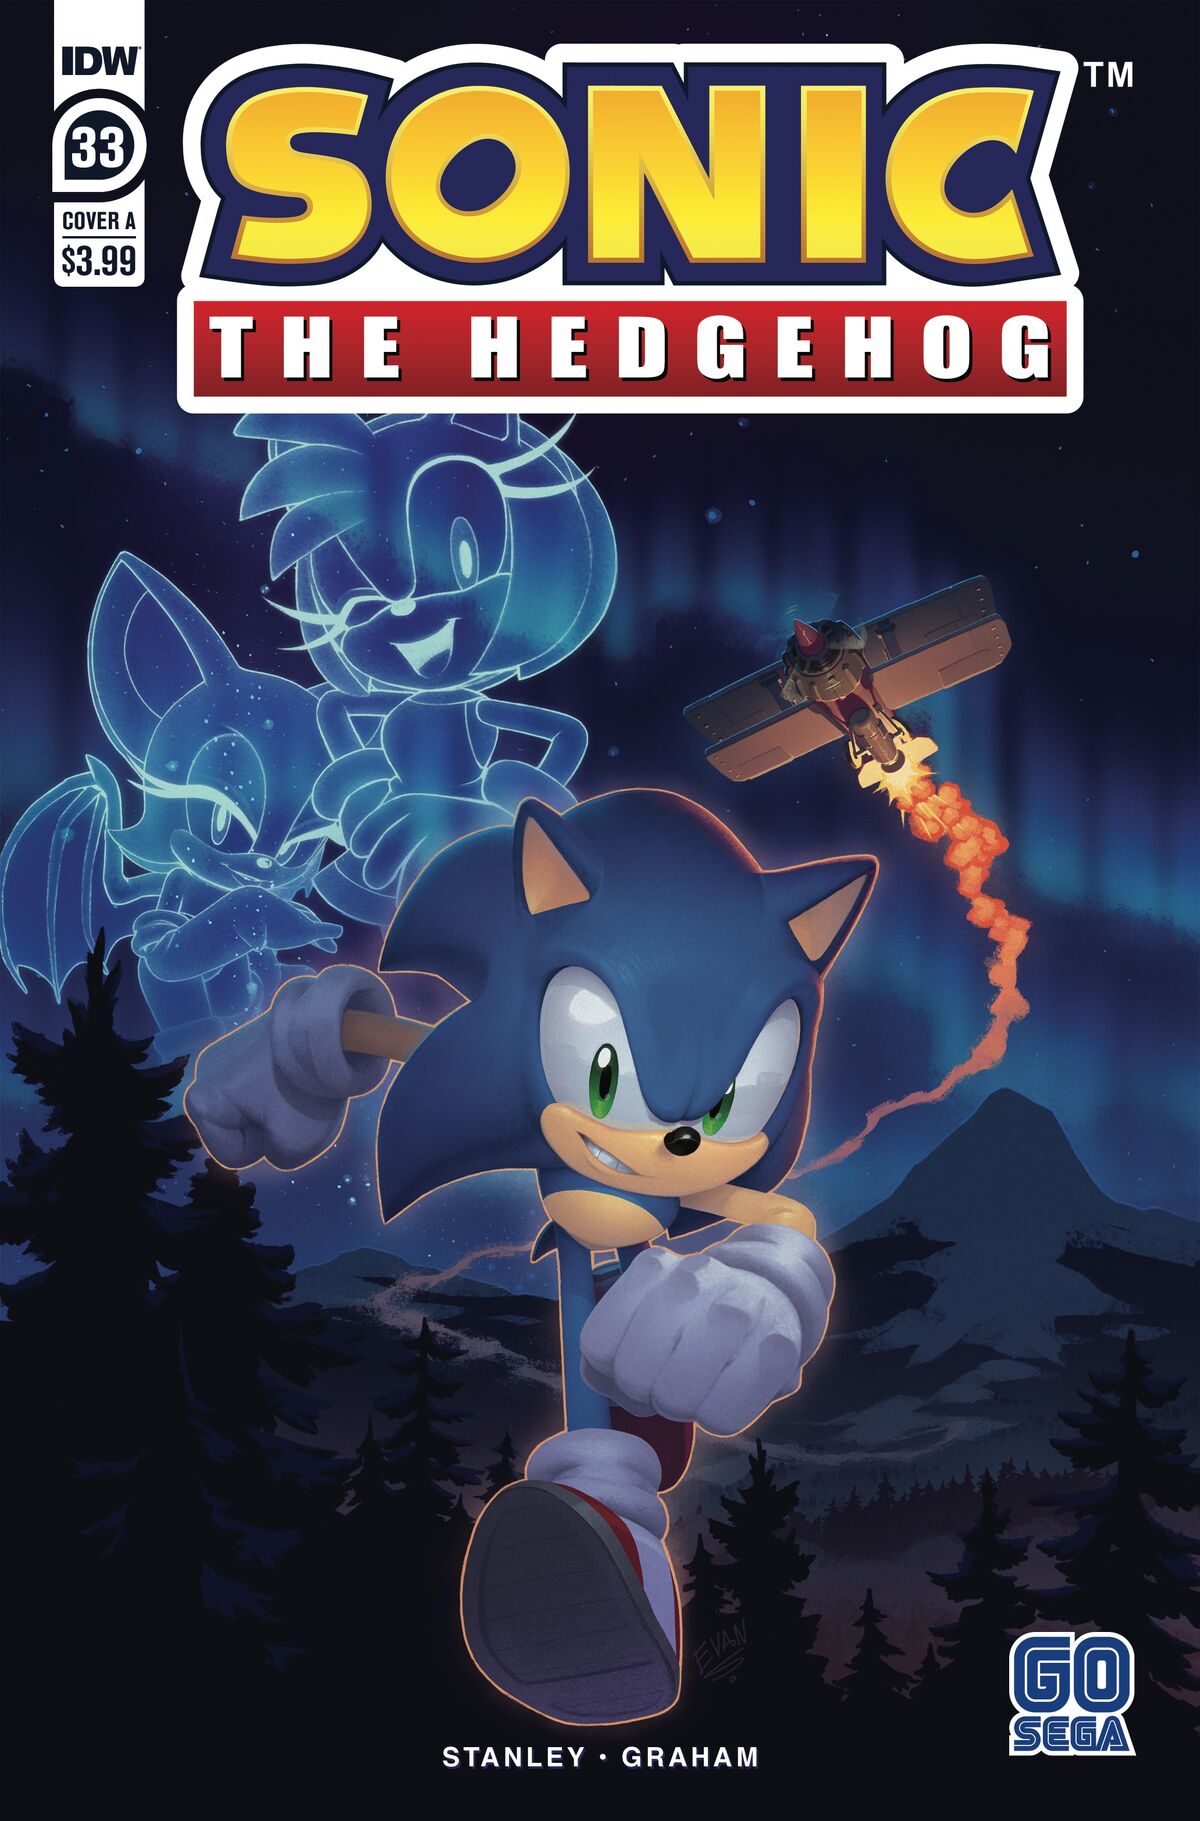 Sonic the Hedgehog (IDW): Chao Races and Badnik Bases Arc / Recap